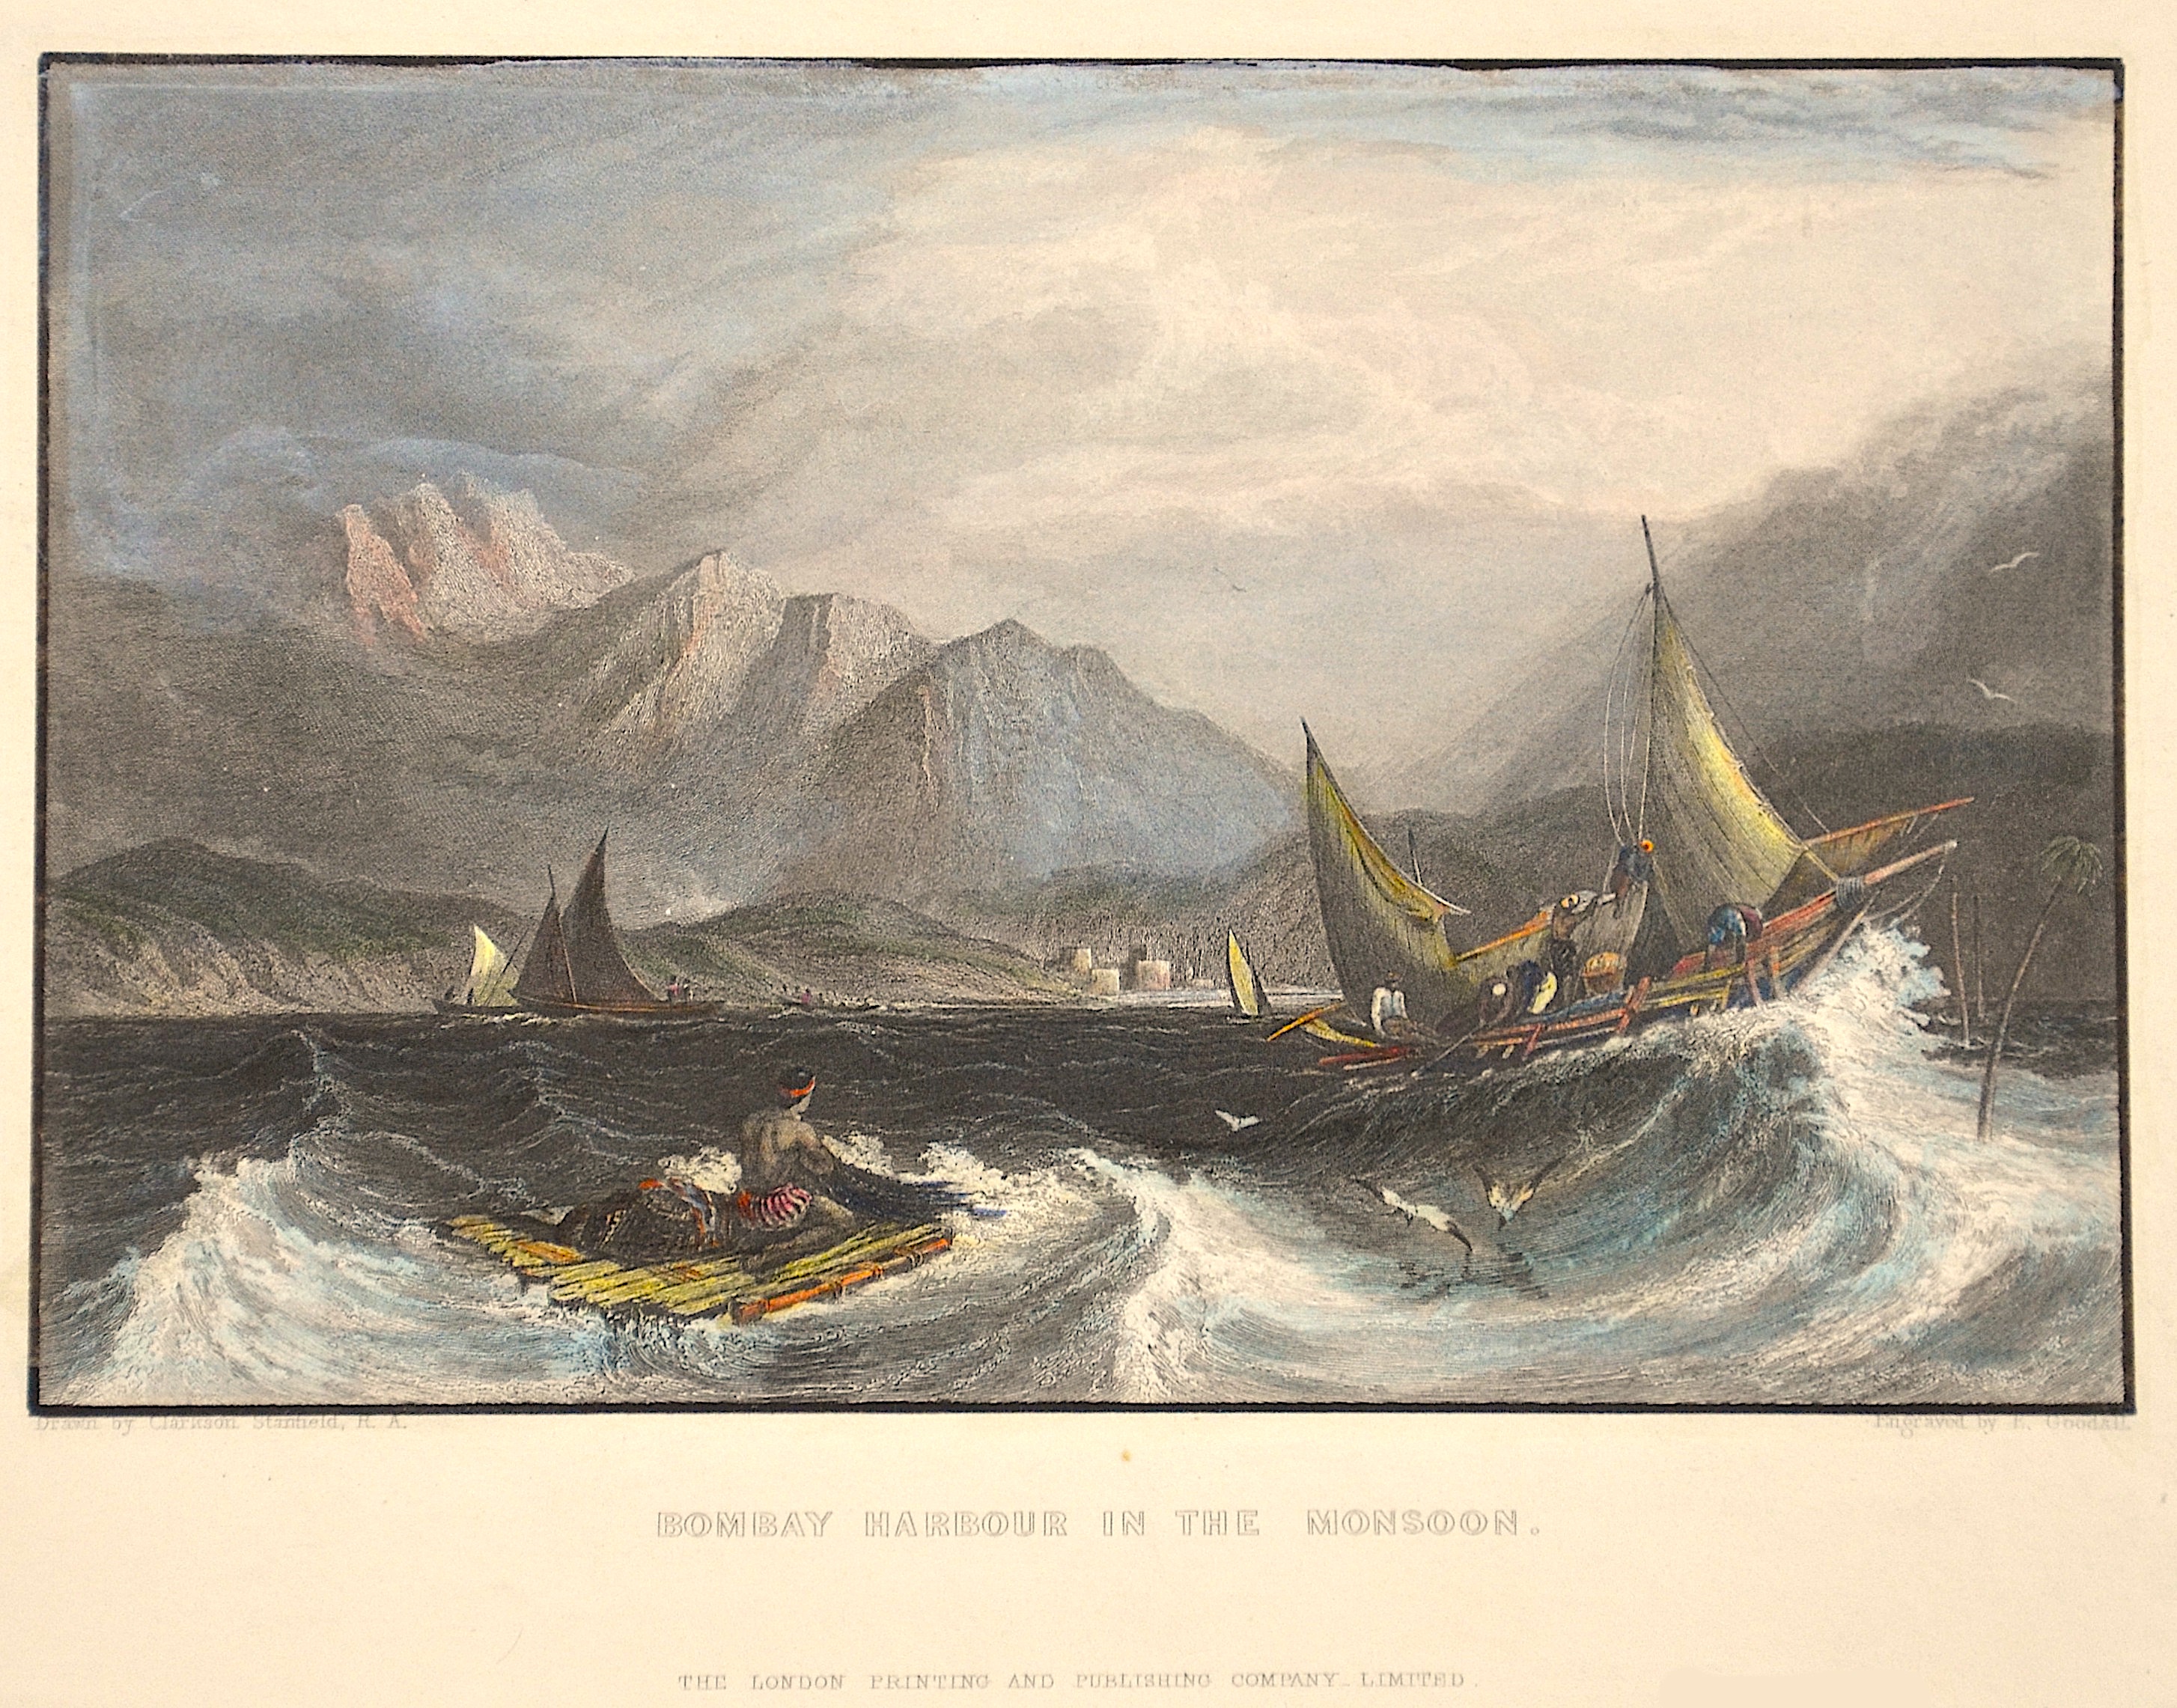 Goodall E. Bombay harbour in the Monsoon